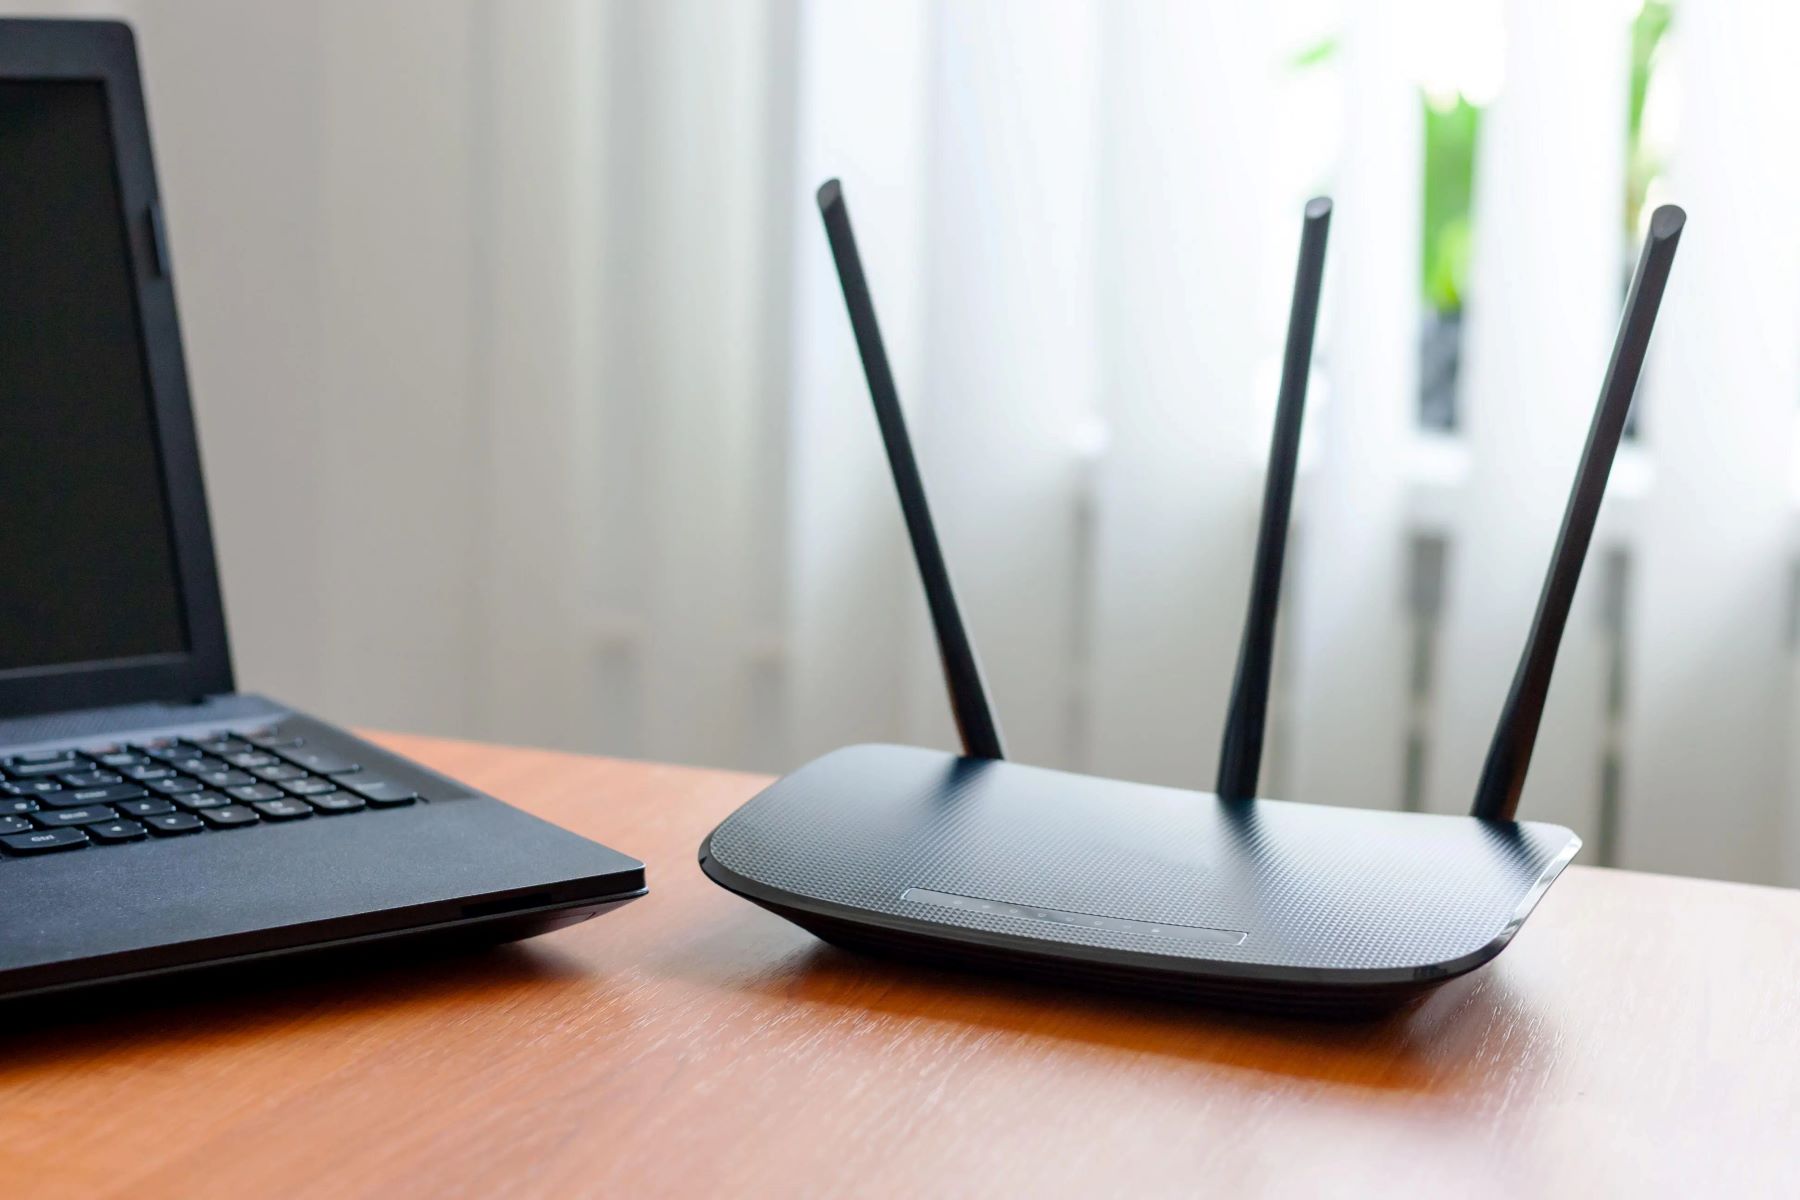 What Is The Process By Which Routers Learn About All Of The Devices On Their Network?